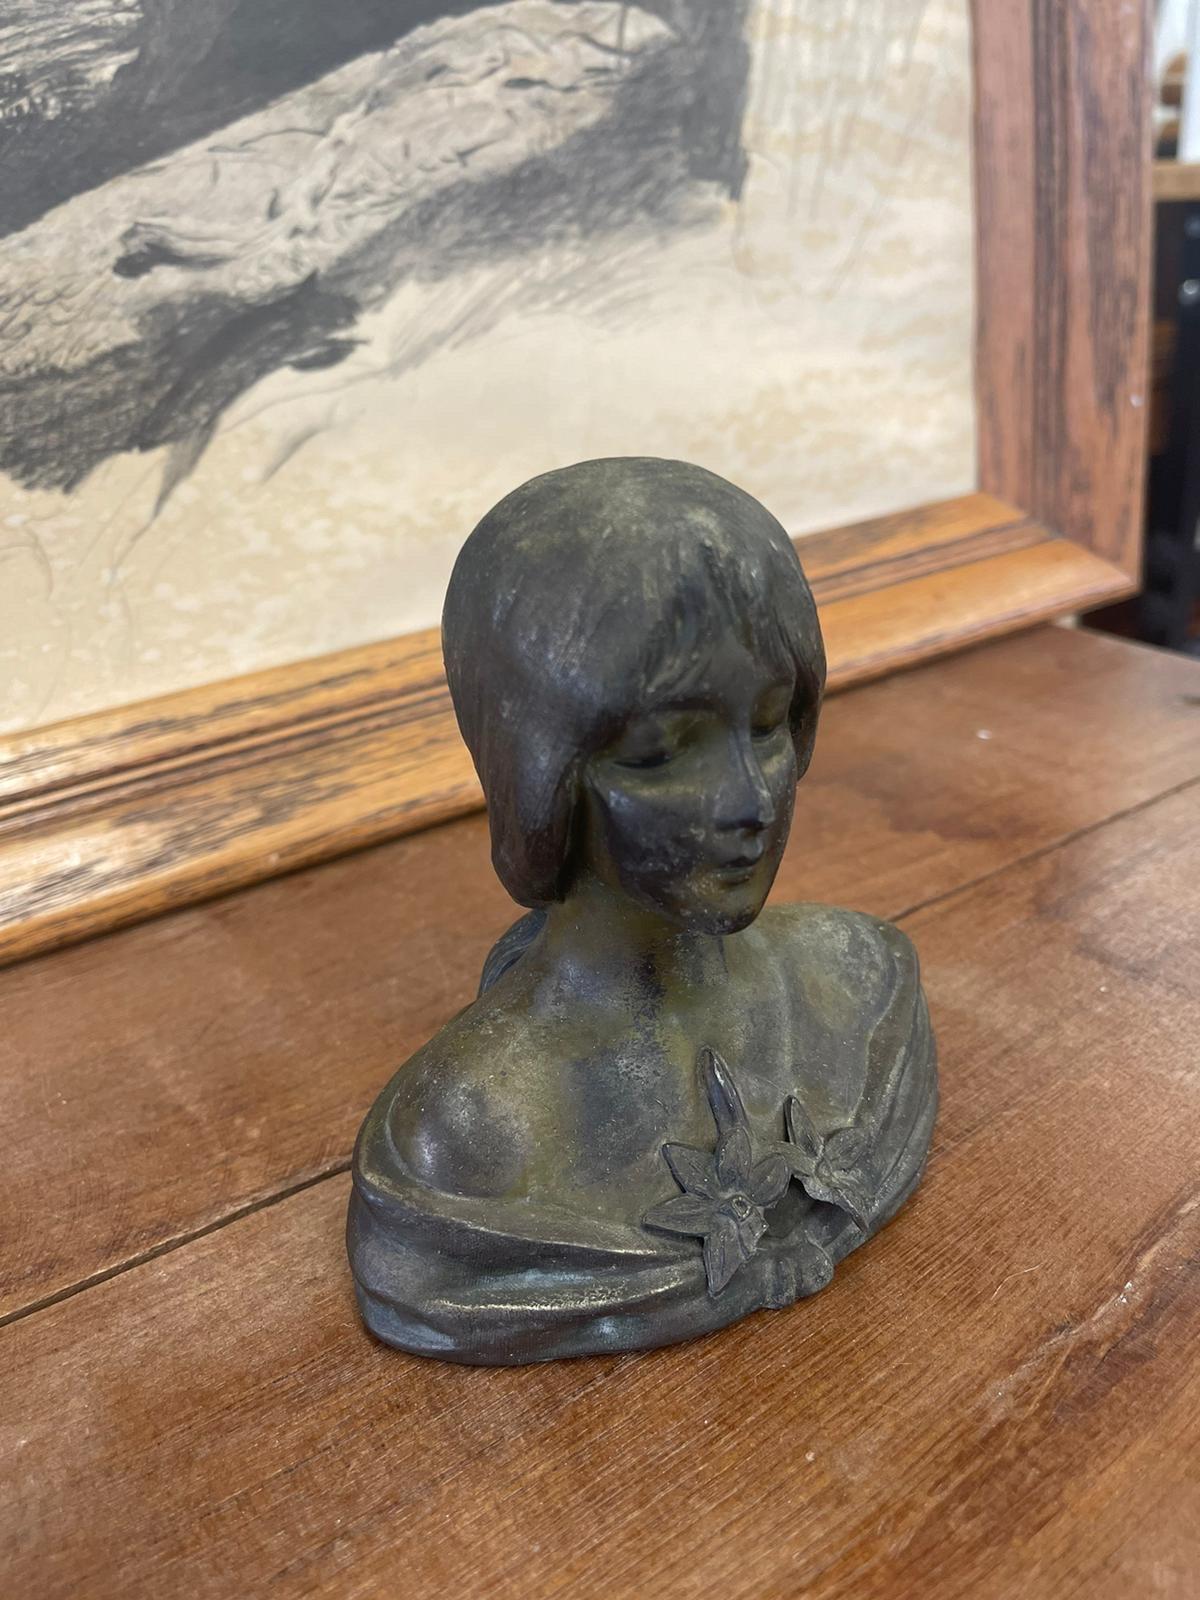 Antique Style Unsigned Sculpture of a Woman with Flower Detail. Pentina Consistent with Age.

Dimensions. 5 W ; 5 D ; 3 H